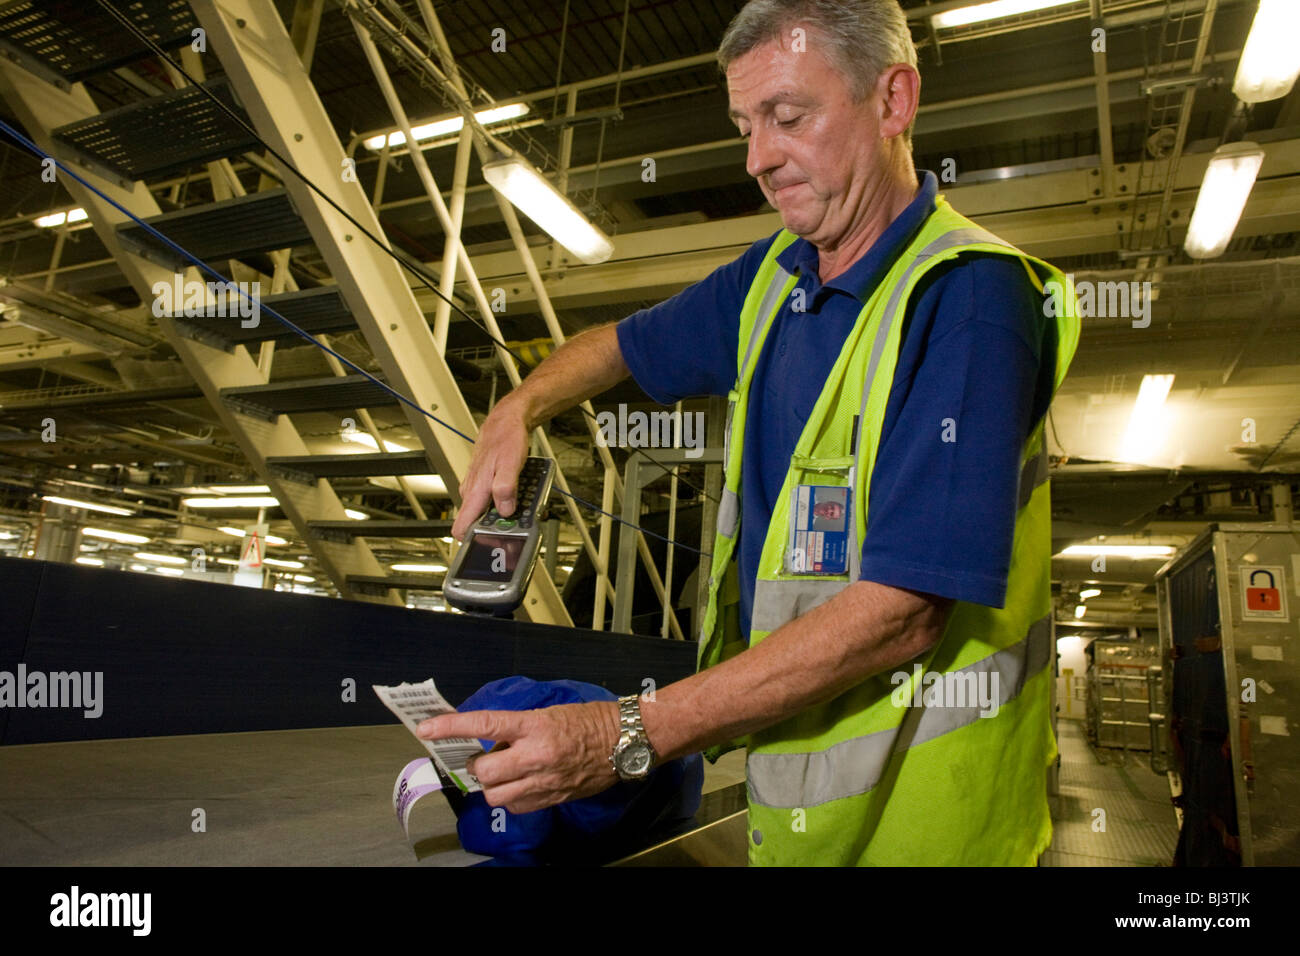 British Airways baggage handler scans the bar code of his airline passenger's item of luggage before loading it into aircraft. Stock Photo